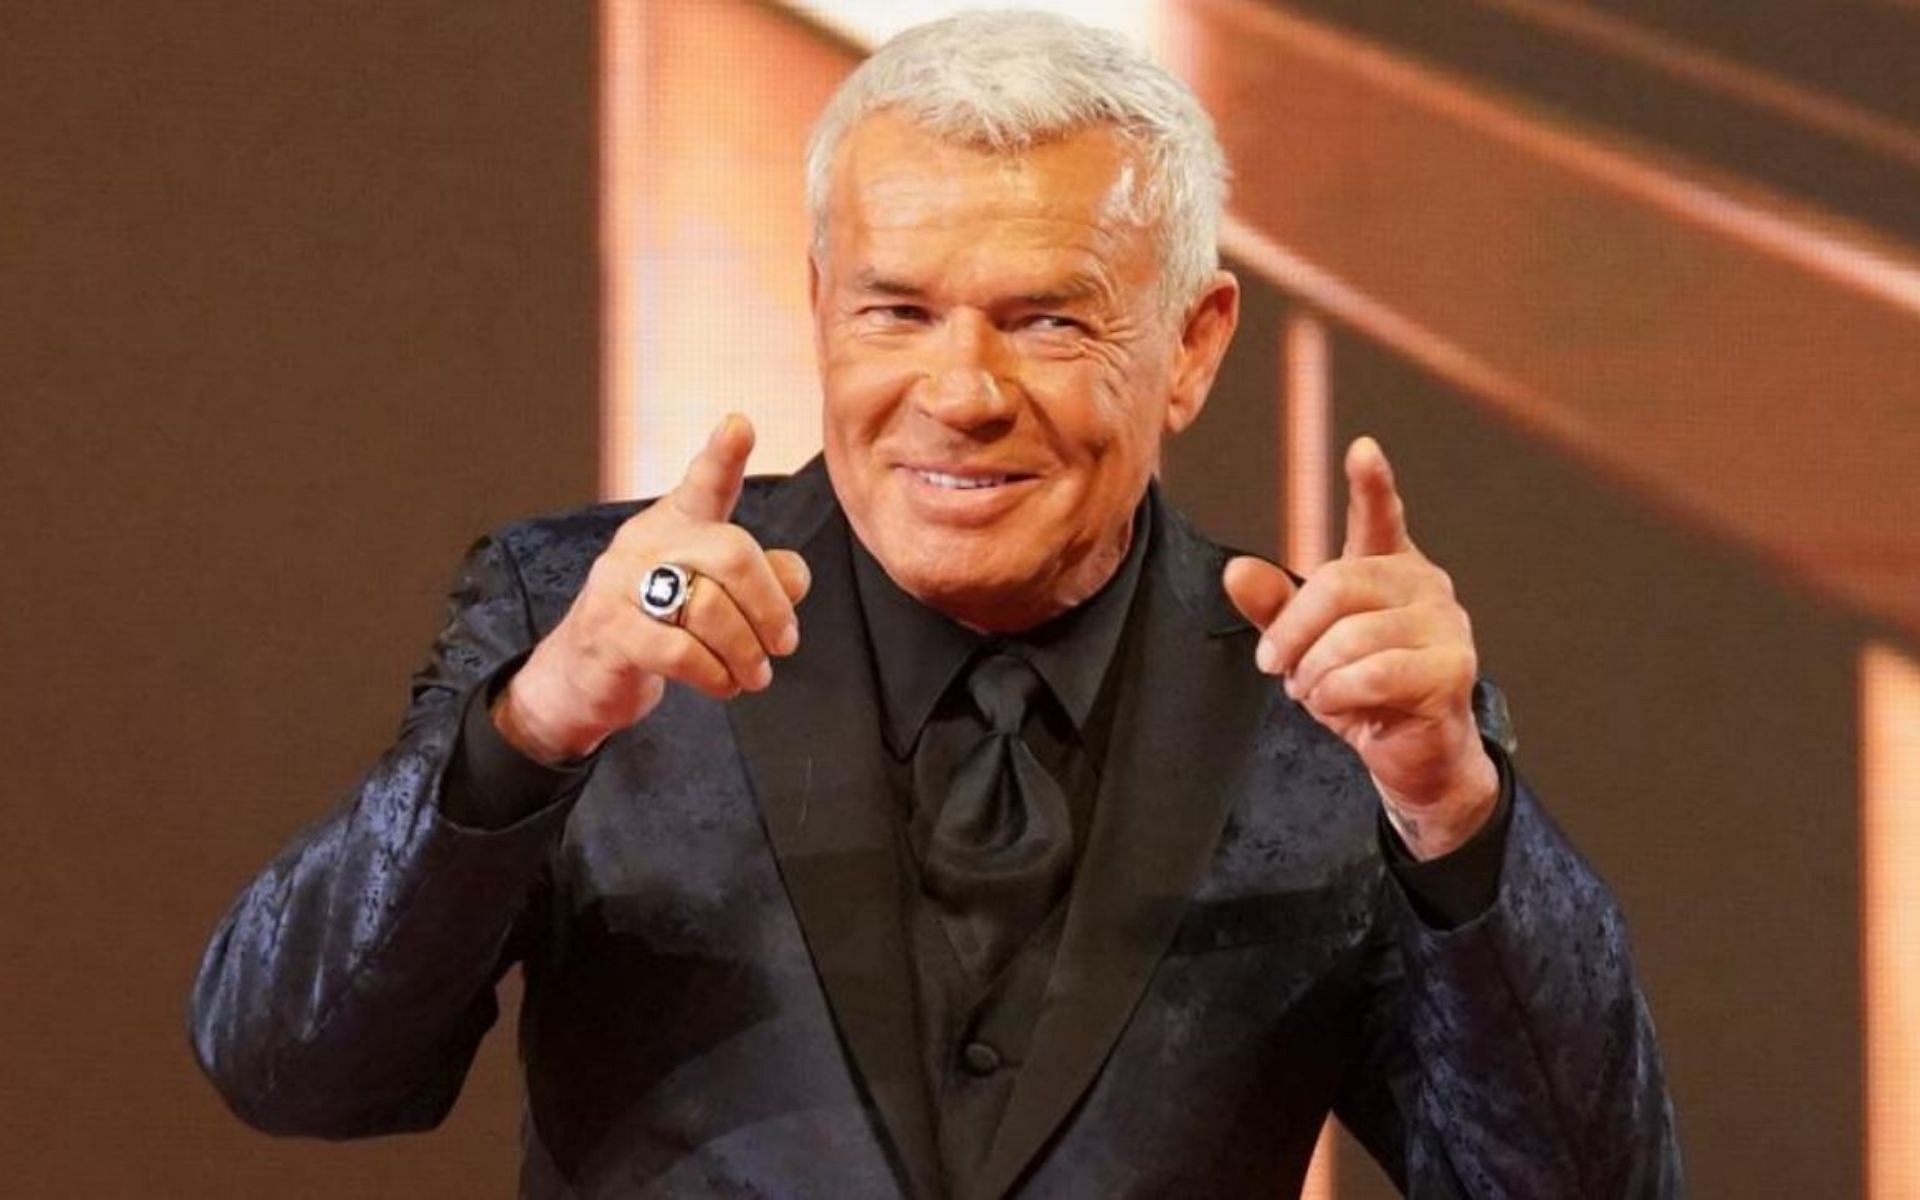 Eric Bischoff was the RAW General Manager from 2002 to 2005